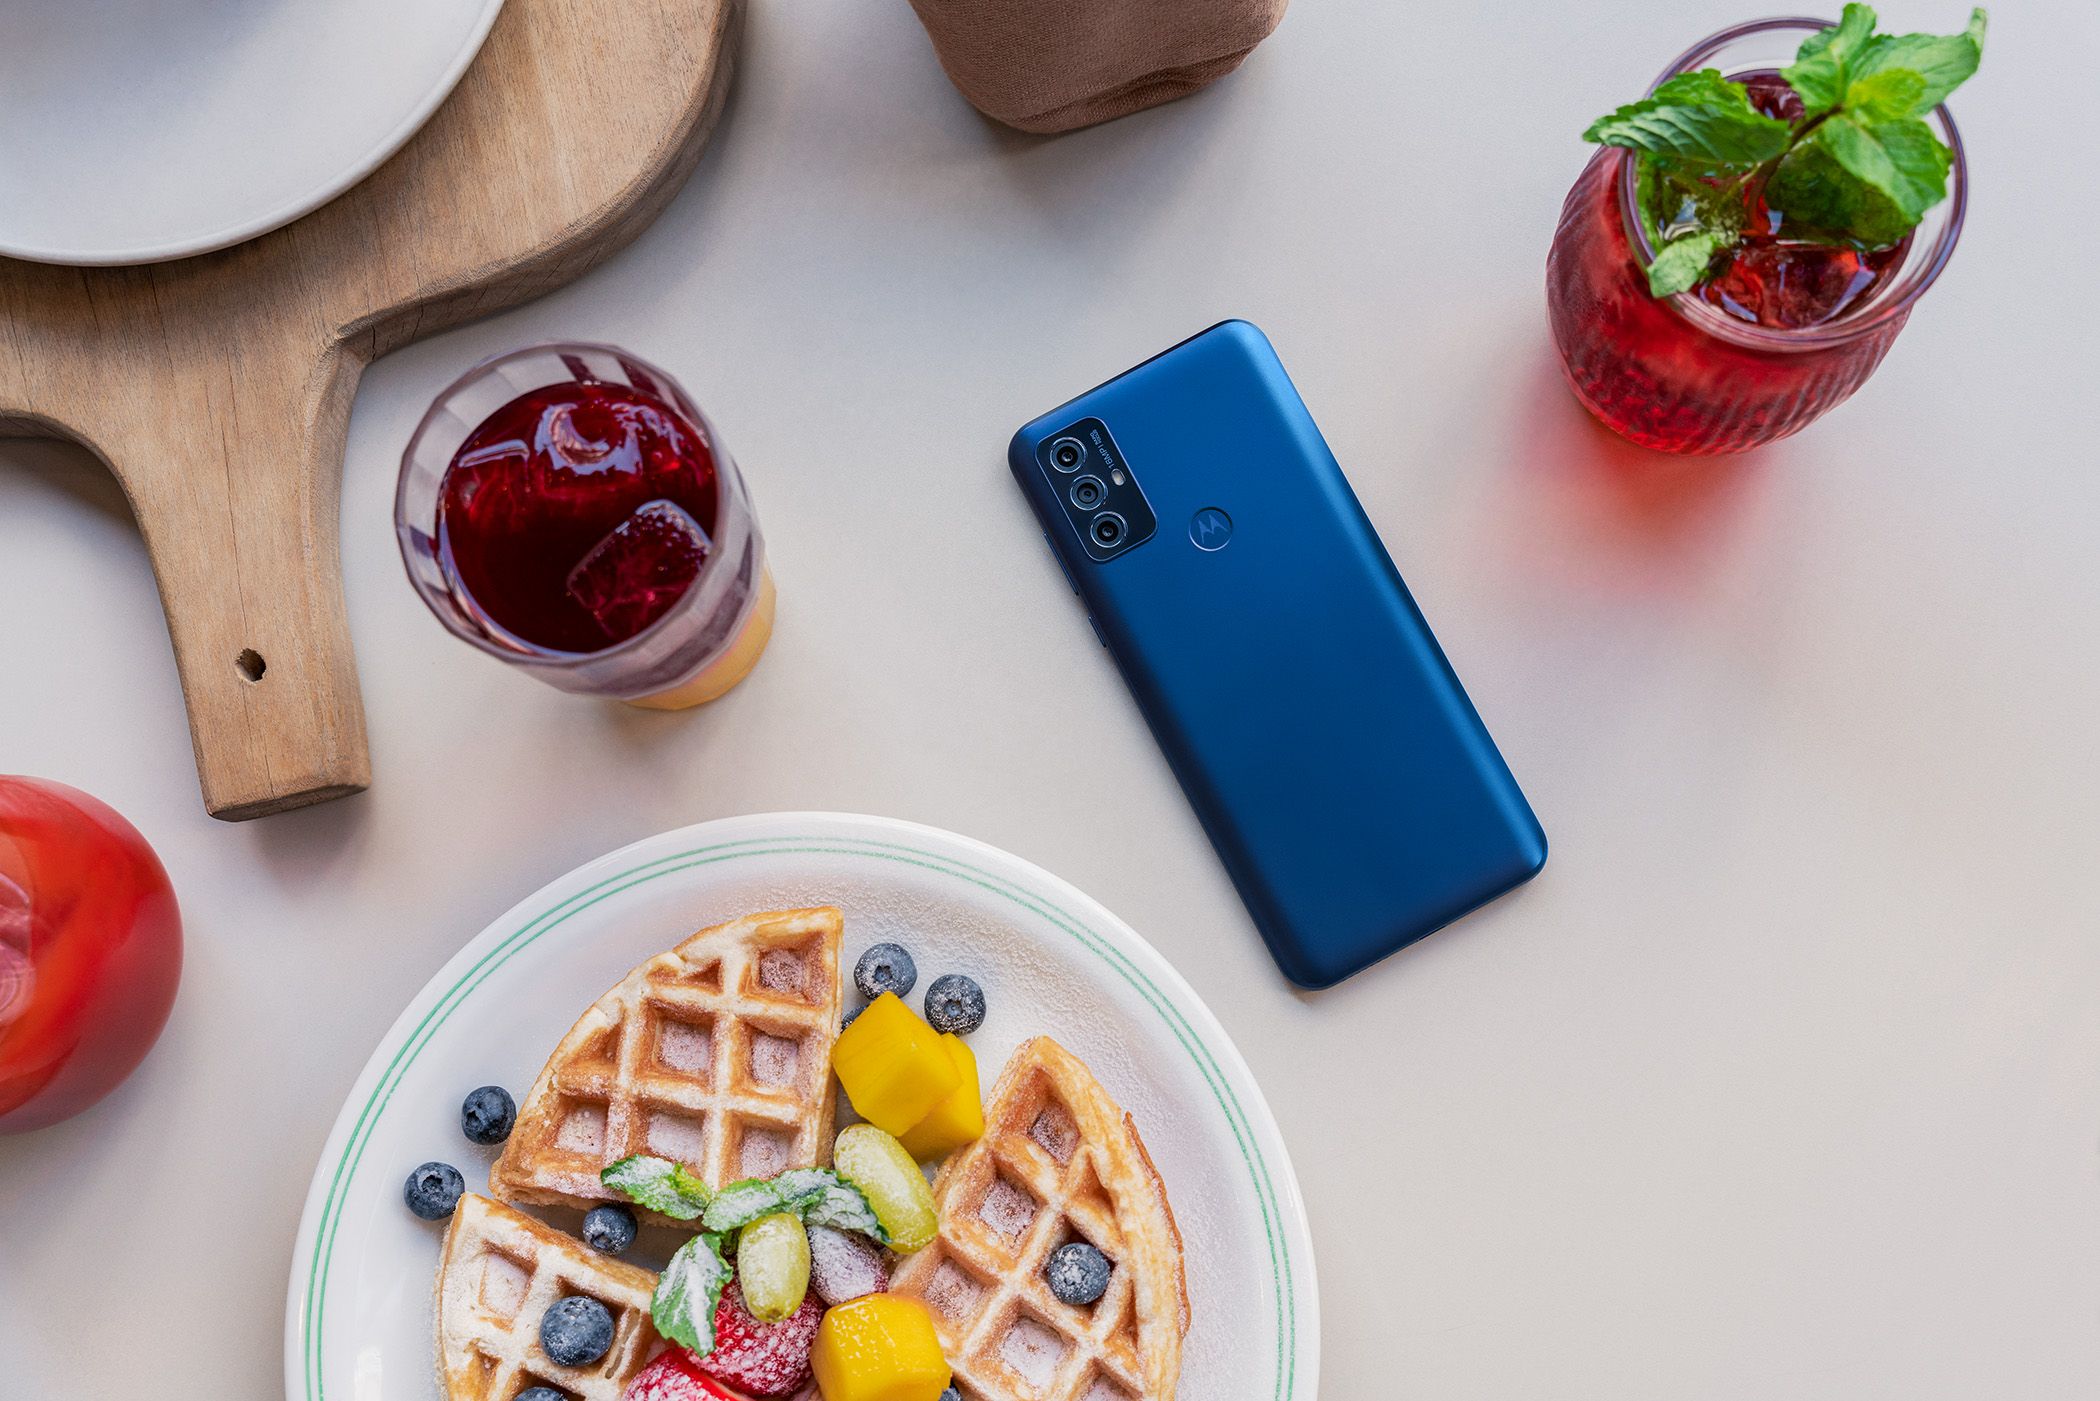 The Moto G Play 2023 is placed face down on the table next to drinks and pies.